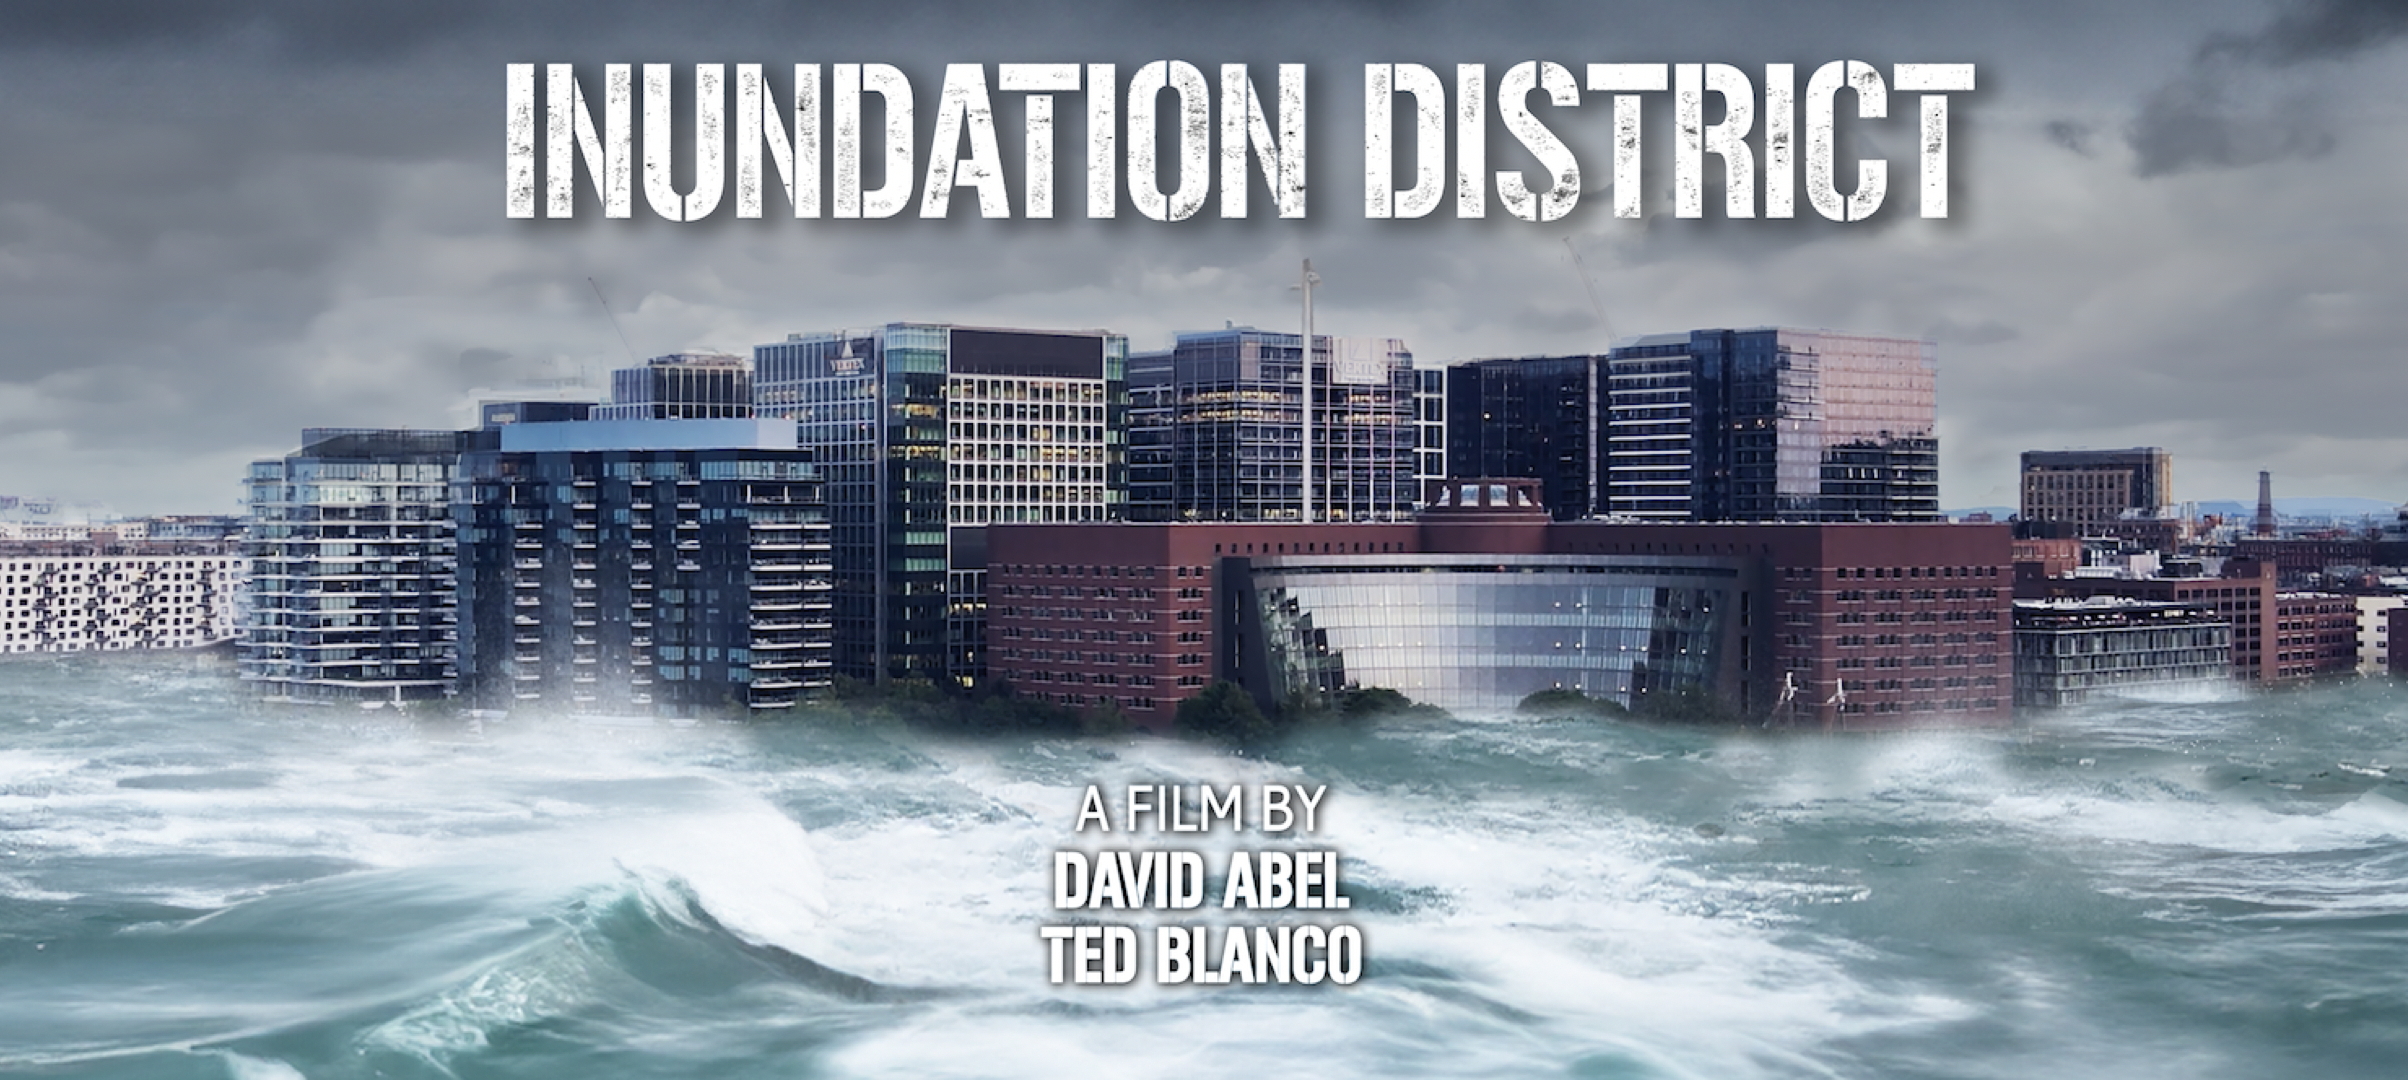 Inundation District a Film by David Abel Ted Blanco 